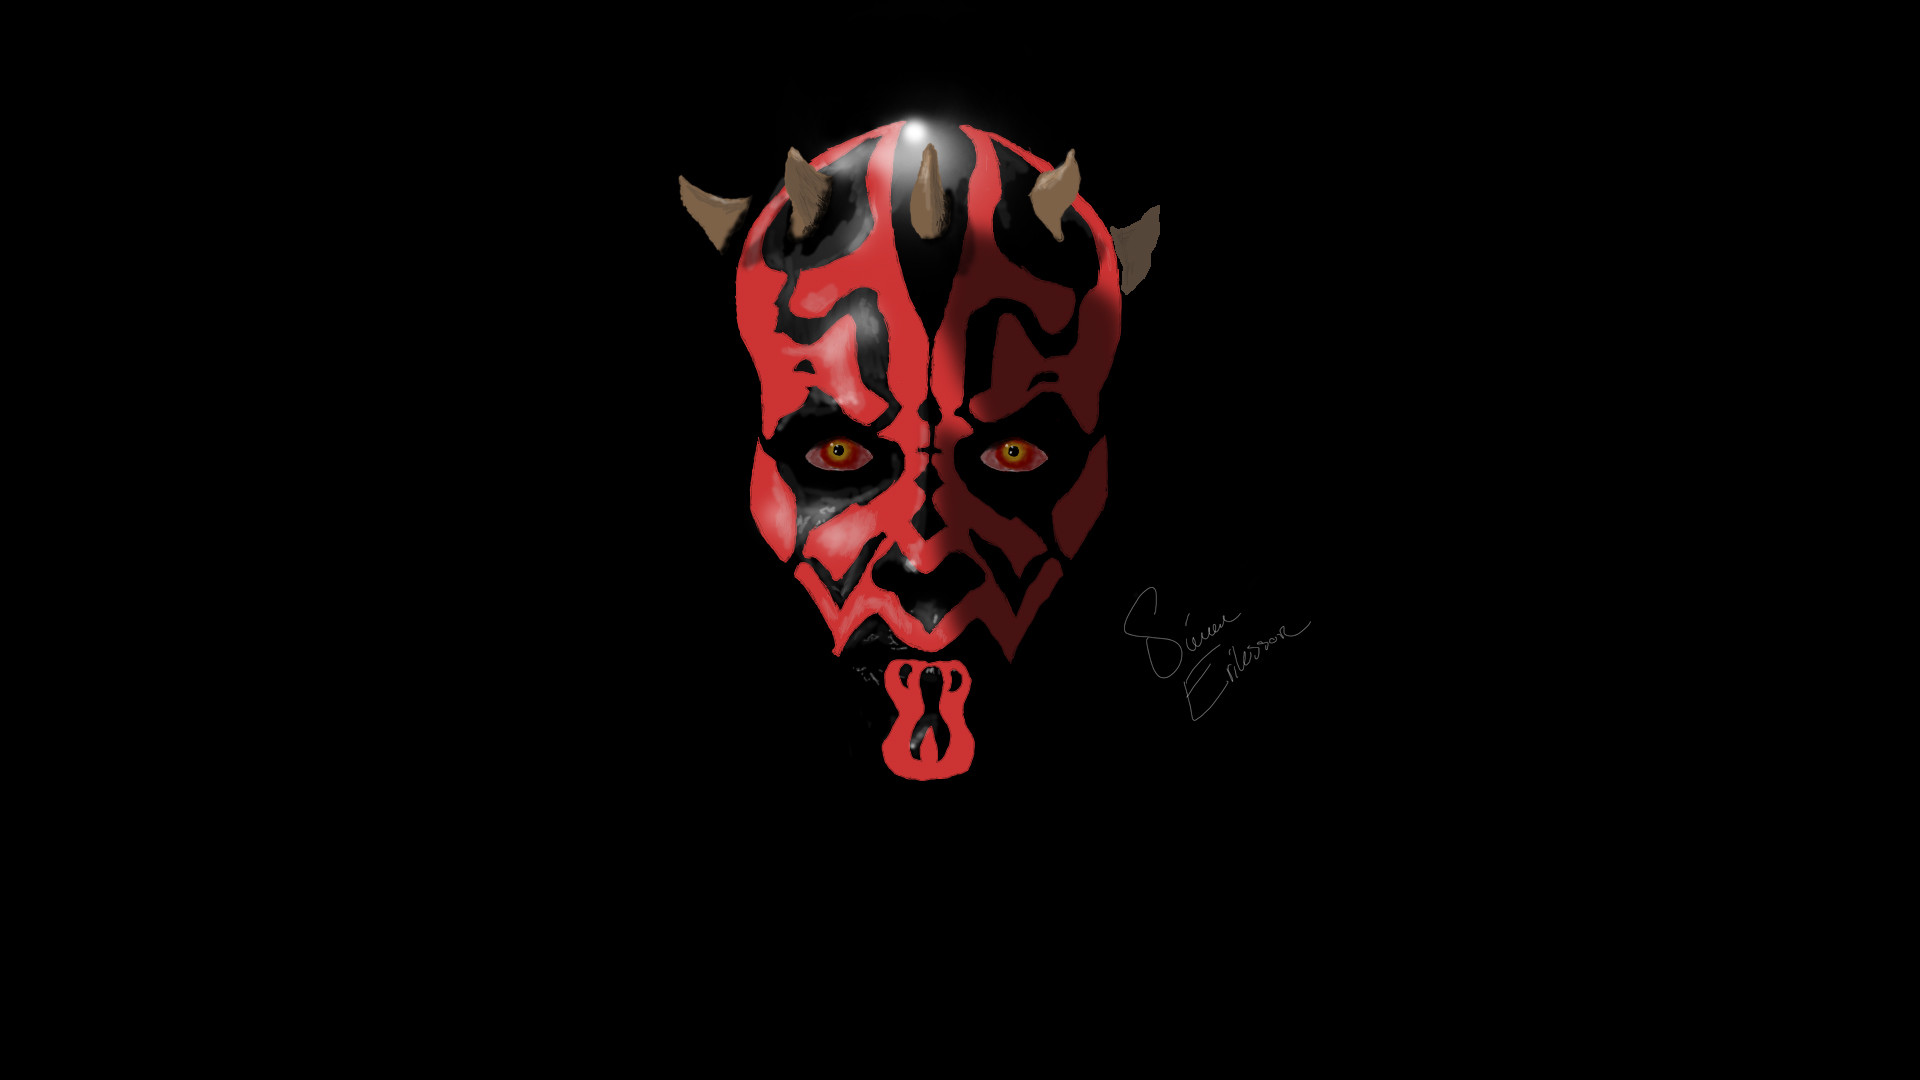 2016 Darth Maul HDQ Wallpapers AHDzBooK Backgrounds